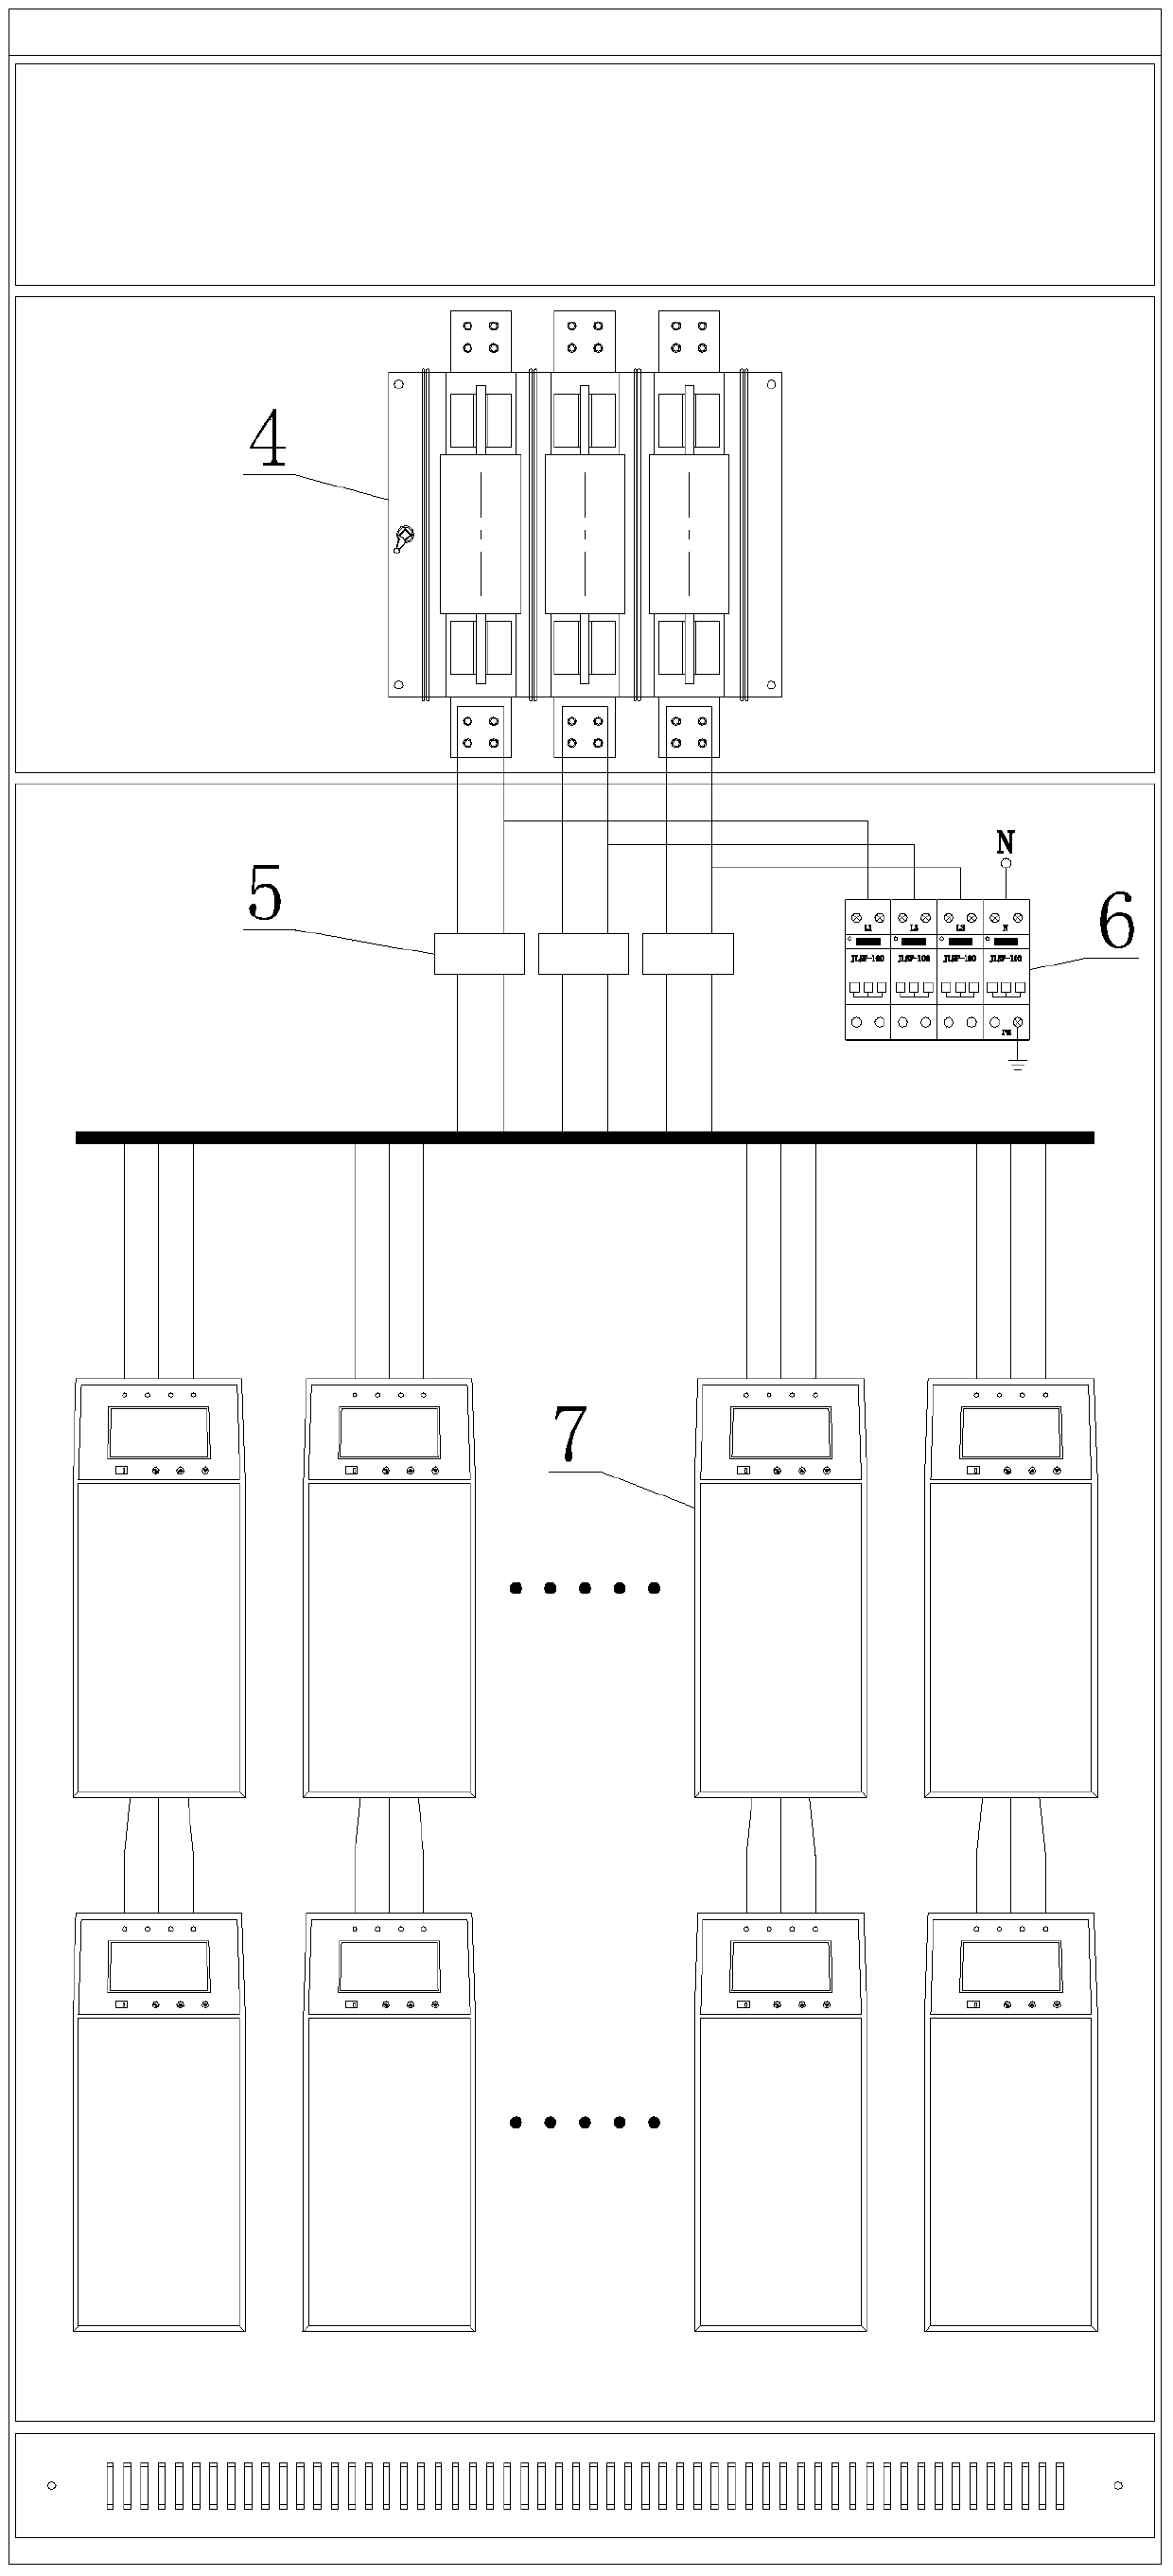 A networking method of an intelligent modular reactive power compensation device